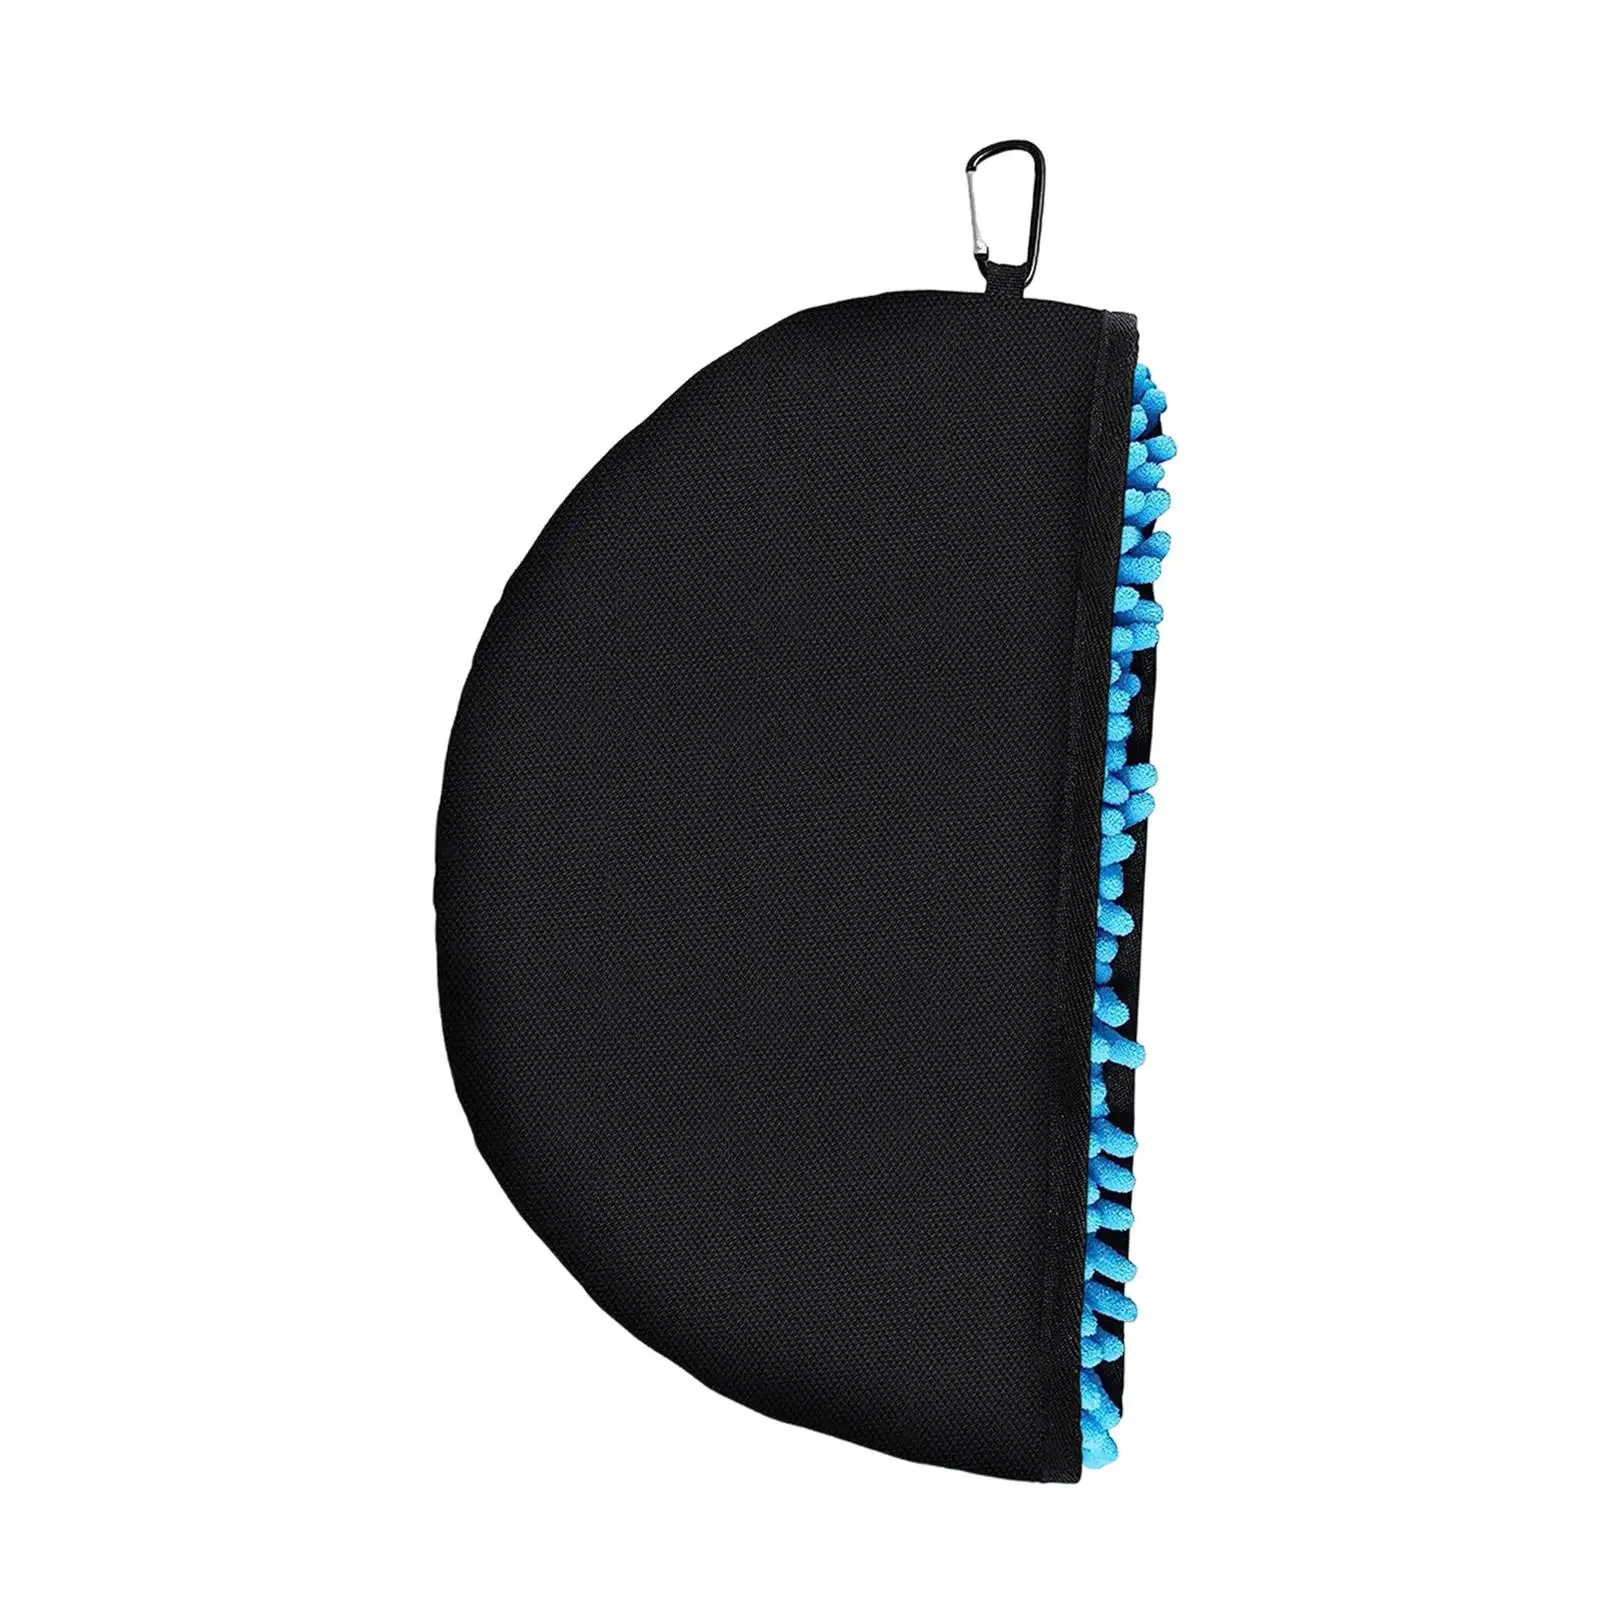 Flying Disc Cleaning Tool Cleaning Towel Cover for Golf Course Travel Sports